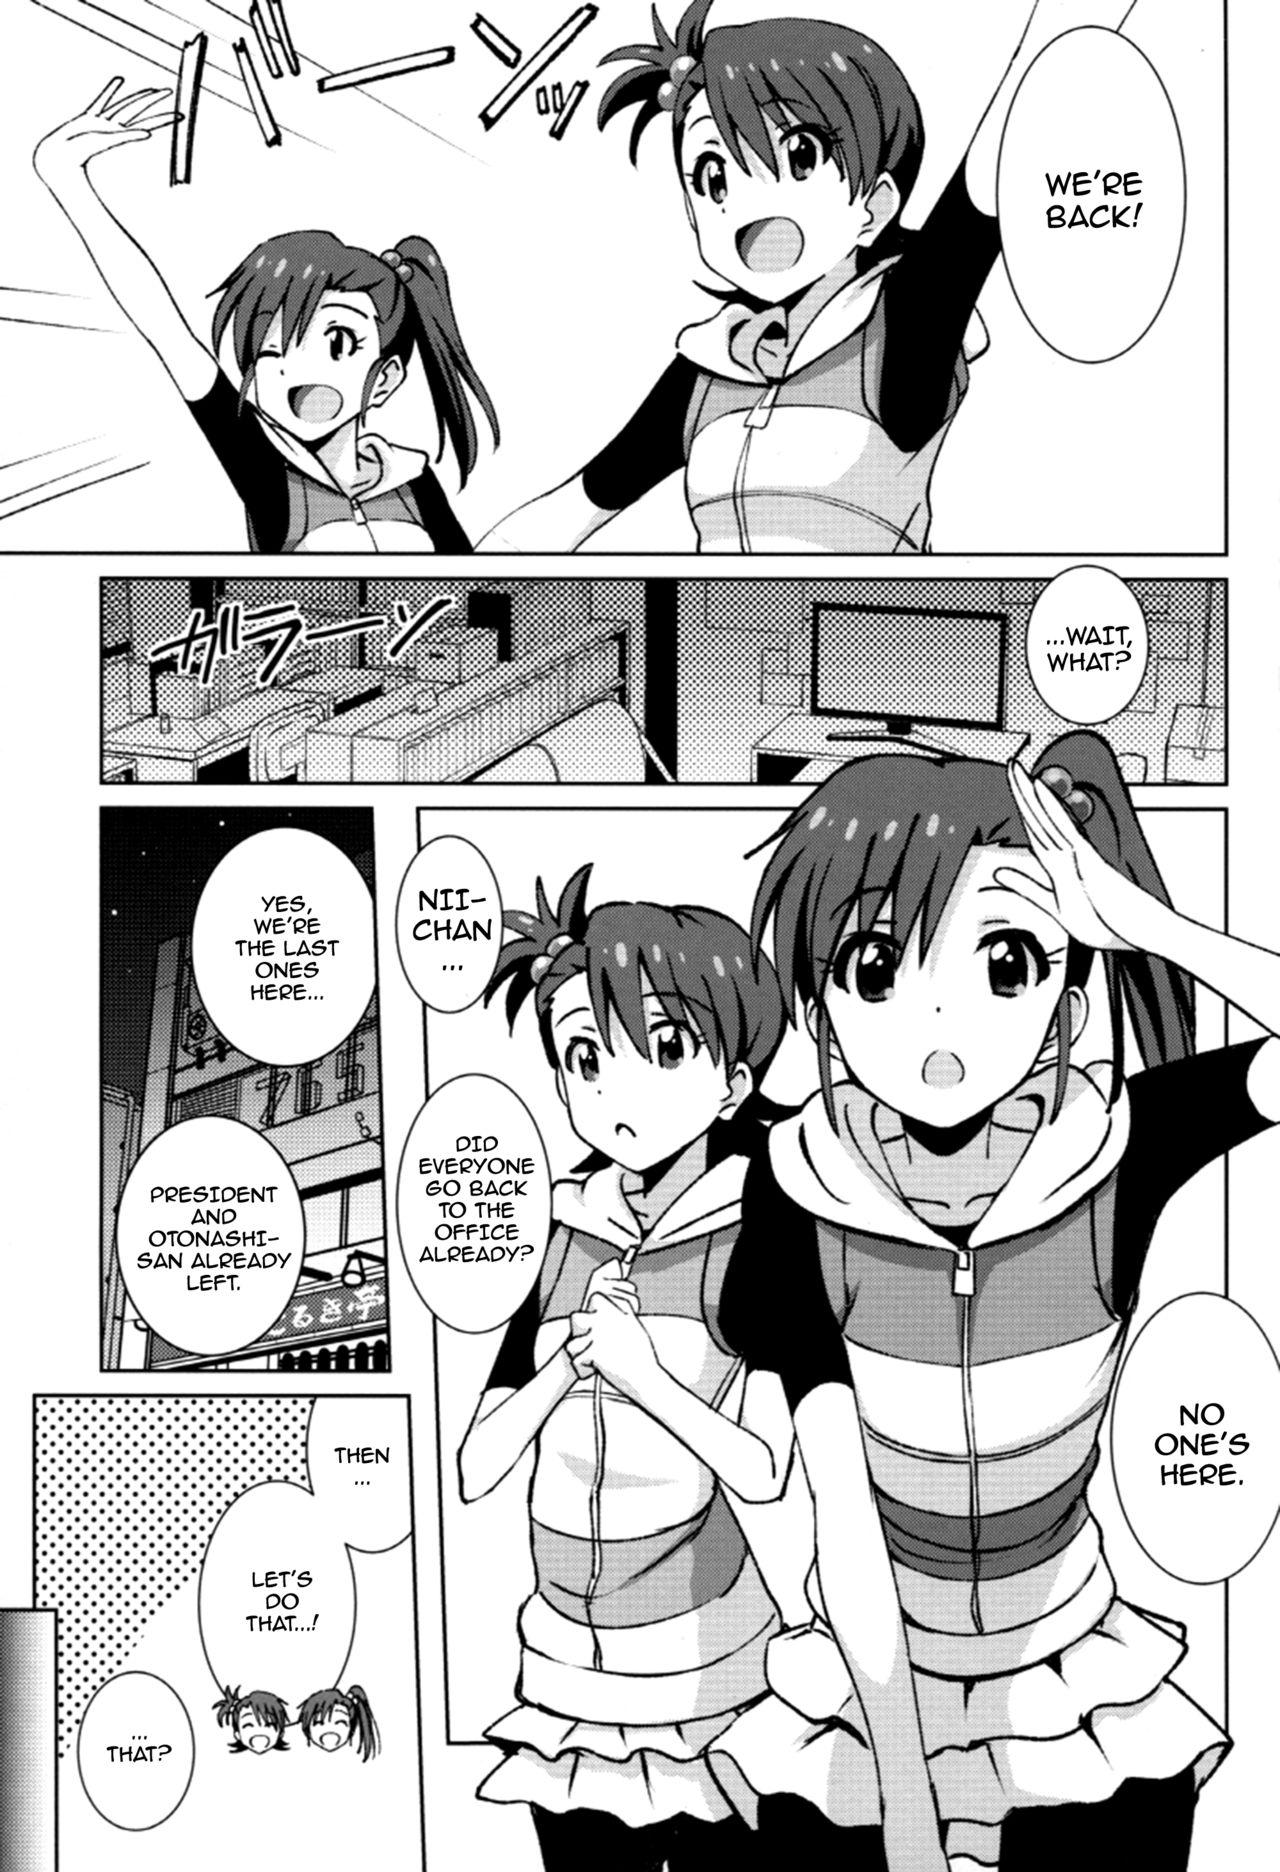 Soft Re:M@STER IDOL ver.AMIMAMI - The idolmaster Milf - Page 2